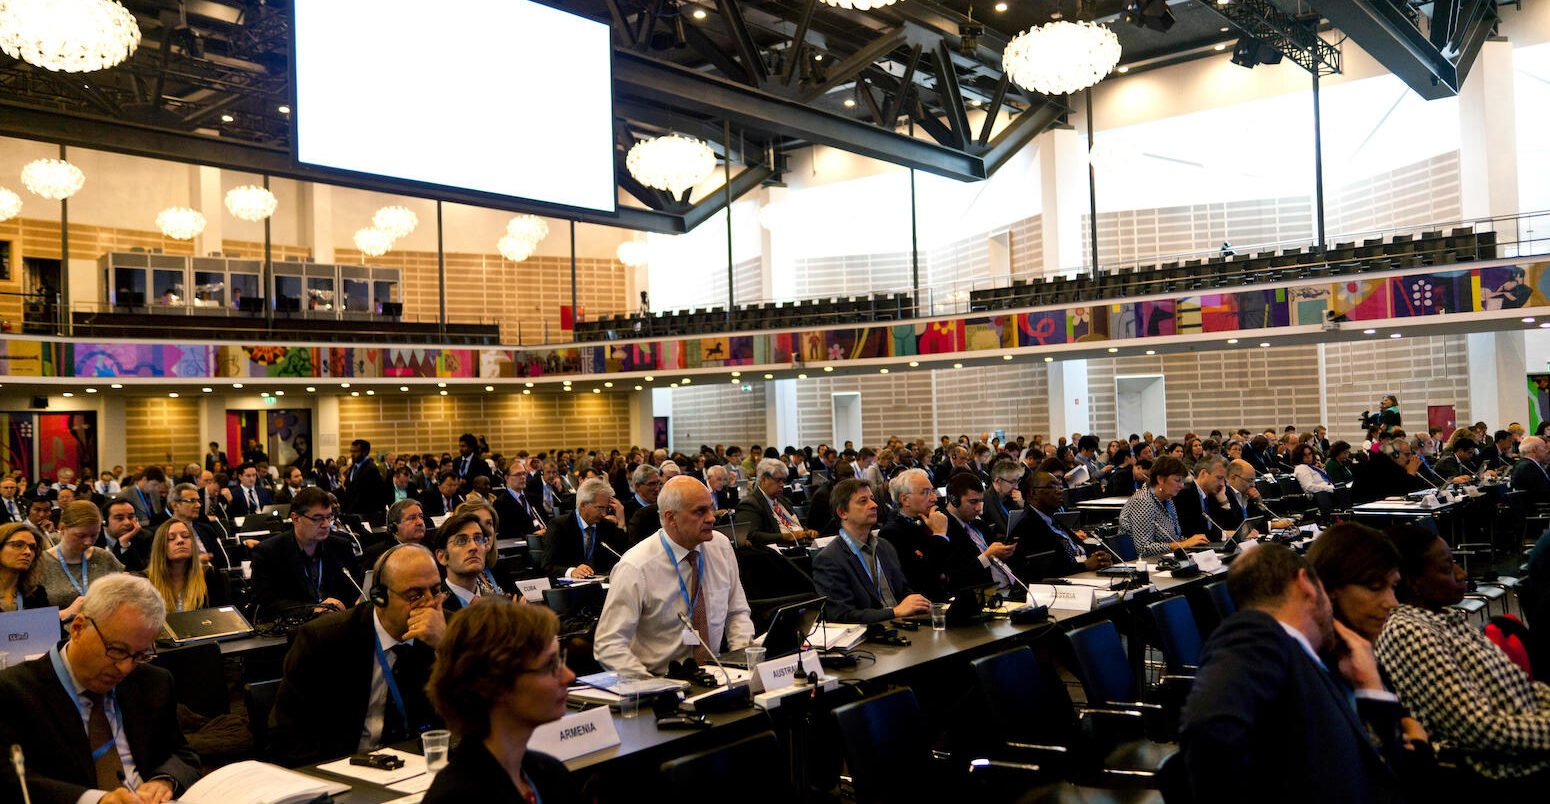 Delegates at the IPCC opening meeting in Denmark, 2014.